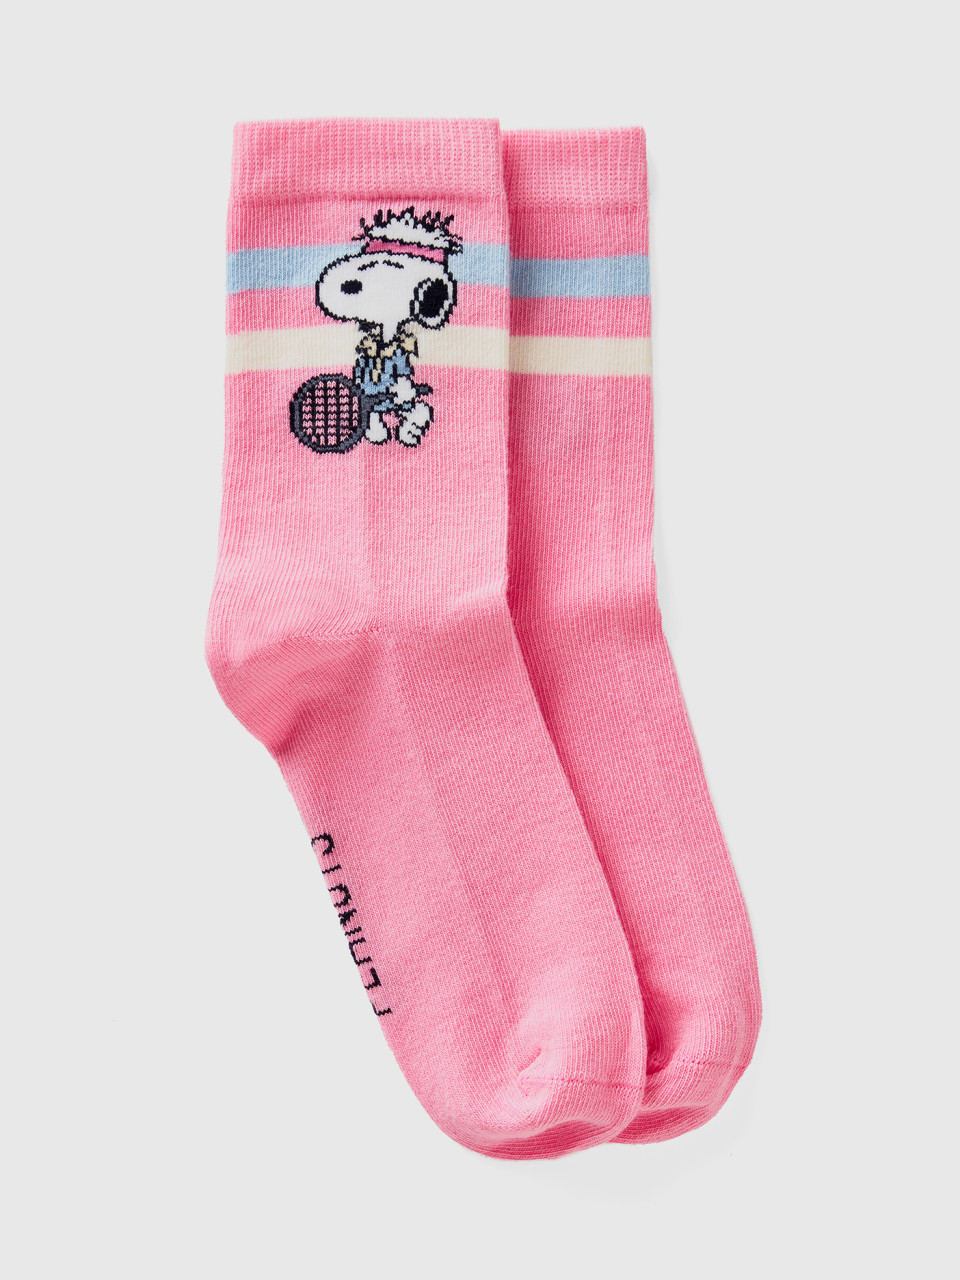 Benetton, Chaussettes Roses Snoopy ©peanuts, Rose, Enfants